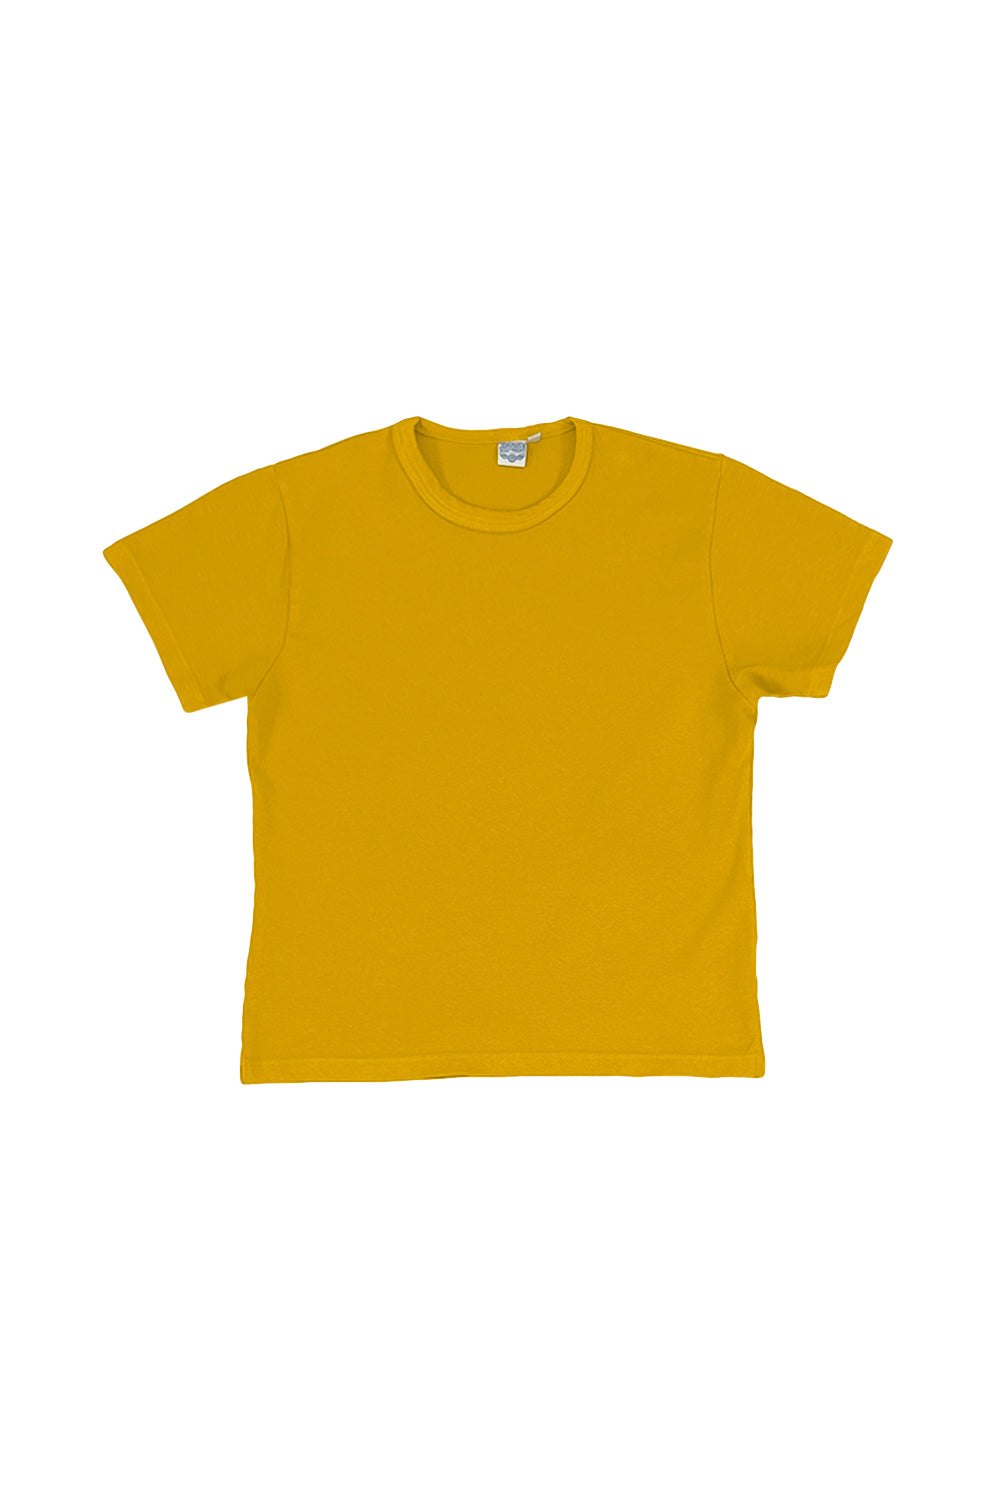 Tiny Tee | Jungmaven Hemp Clothing & Accessories / Color: Spicy Mustard